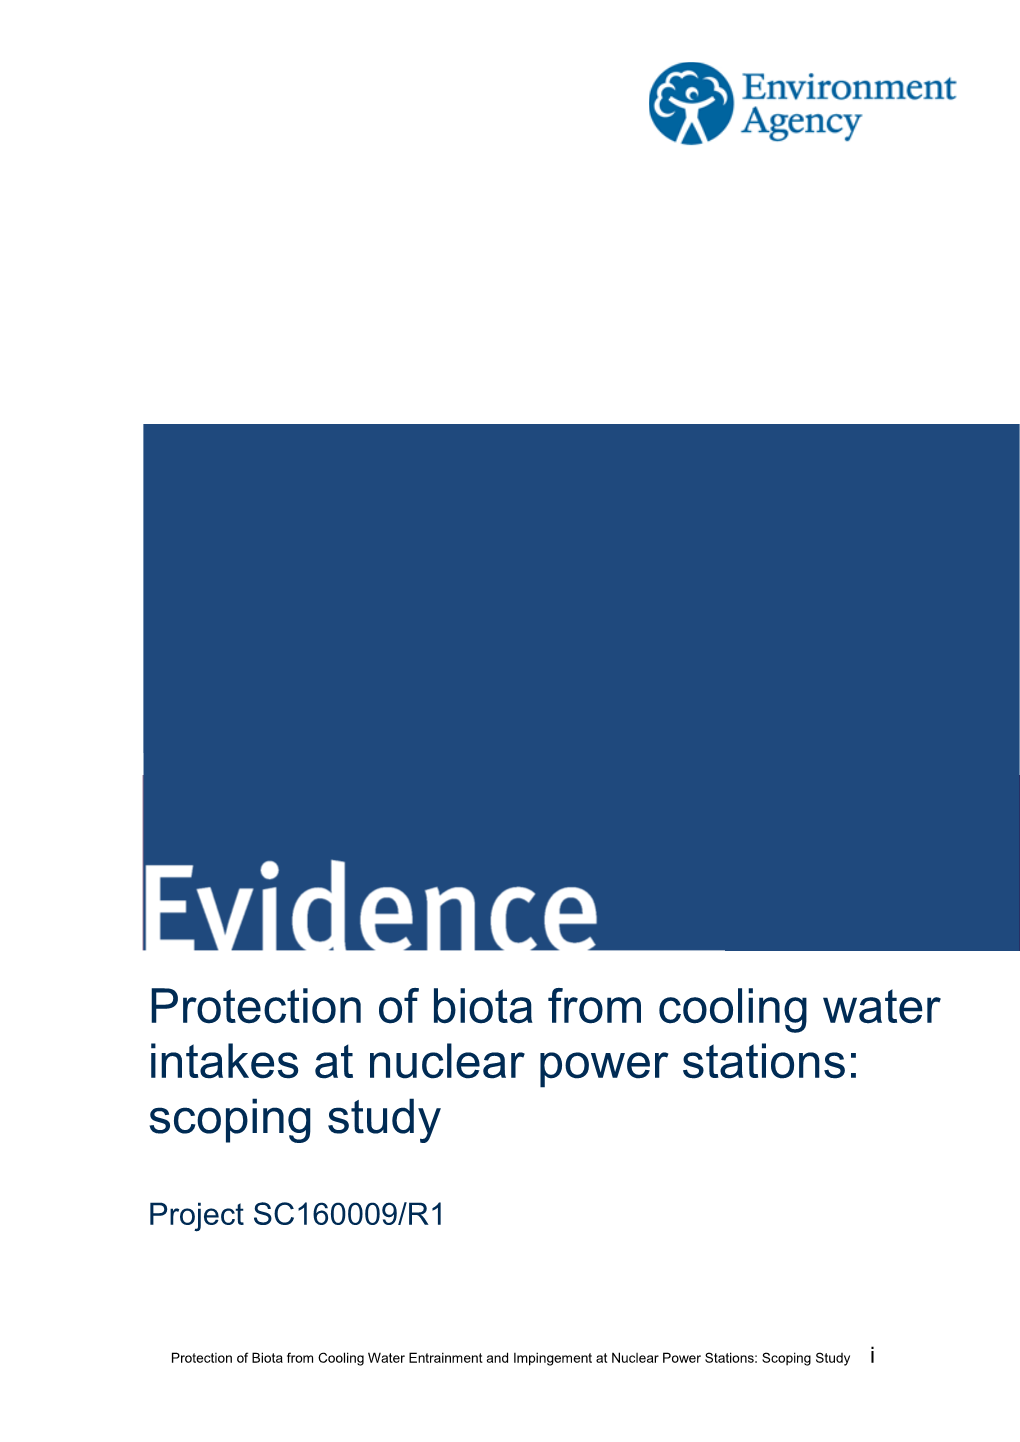 Protection of Biota from Cooling Water Intakes at Nuclear Power Stations: Scoping Study